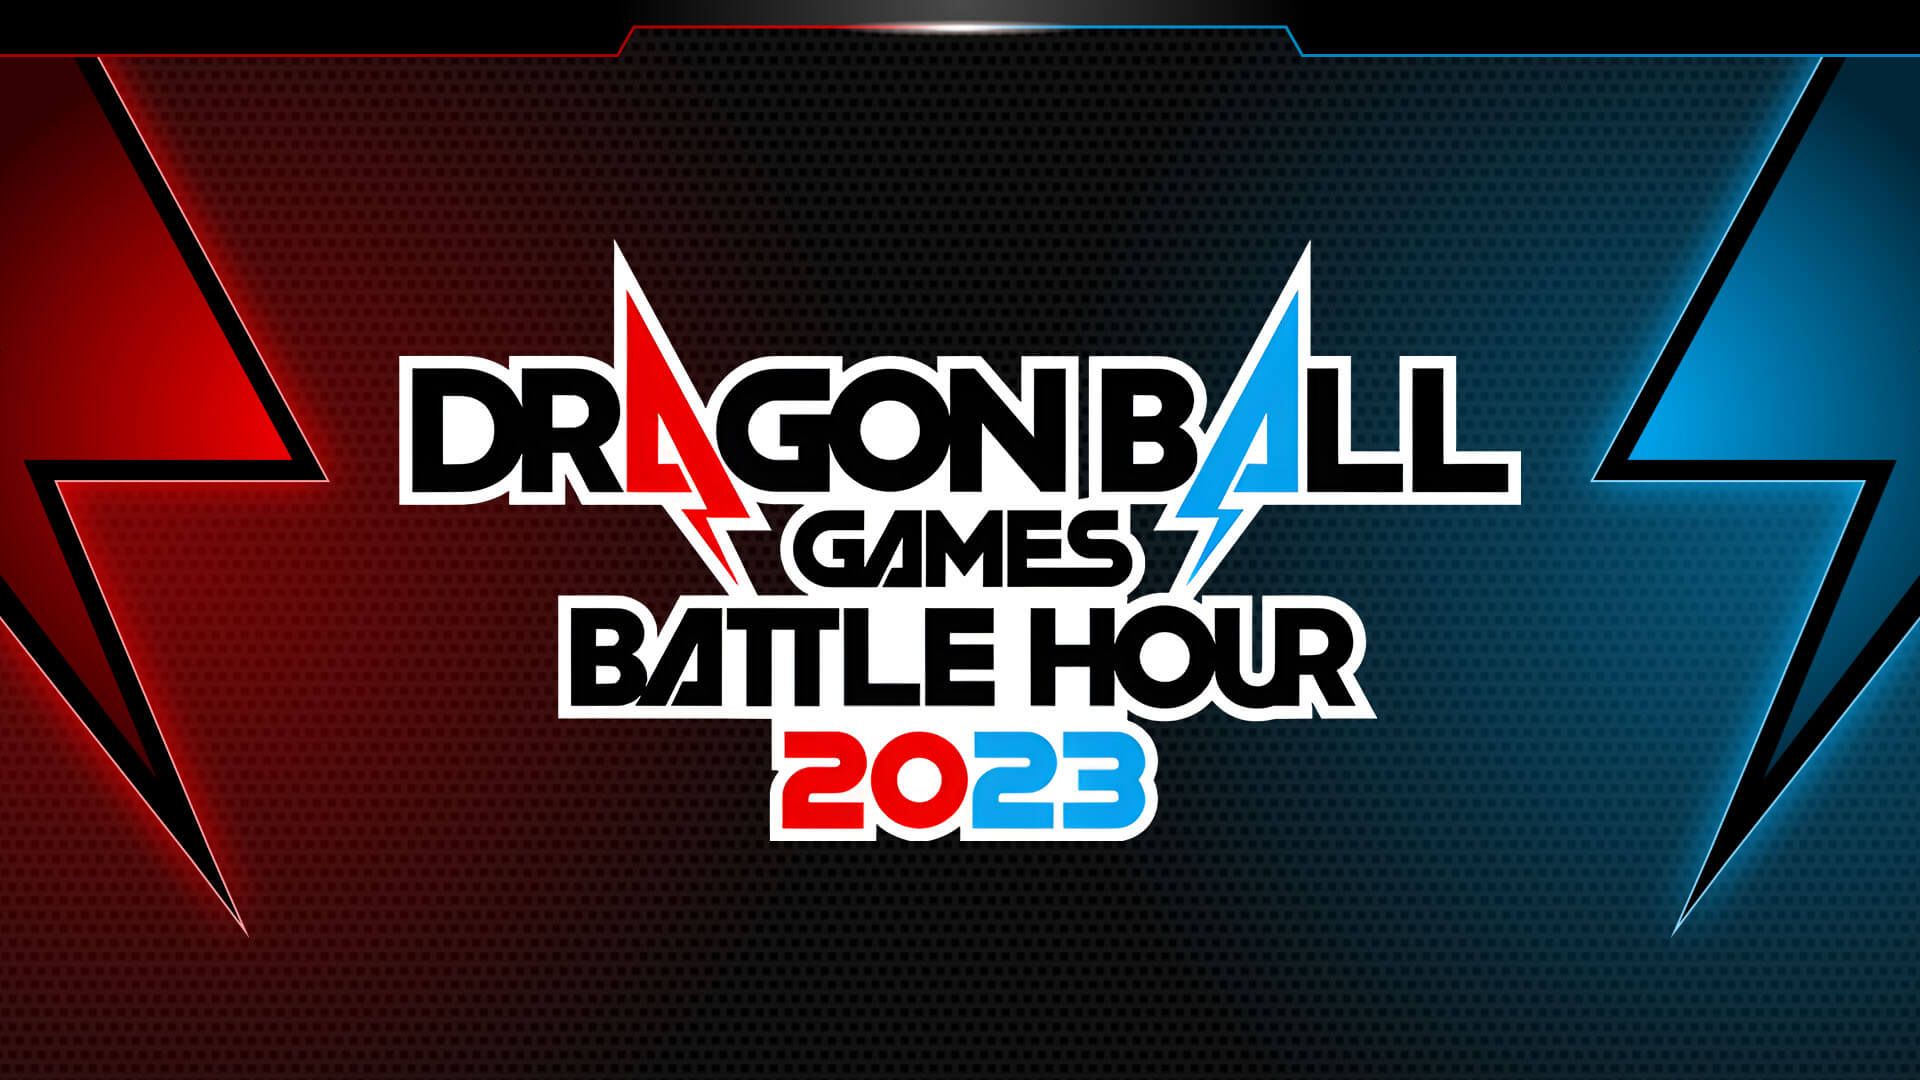 Dragon Ball Games Battle Hour Returns in 2023, With an Event in 2022